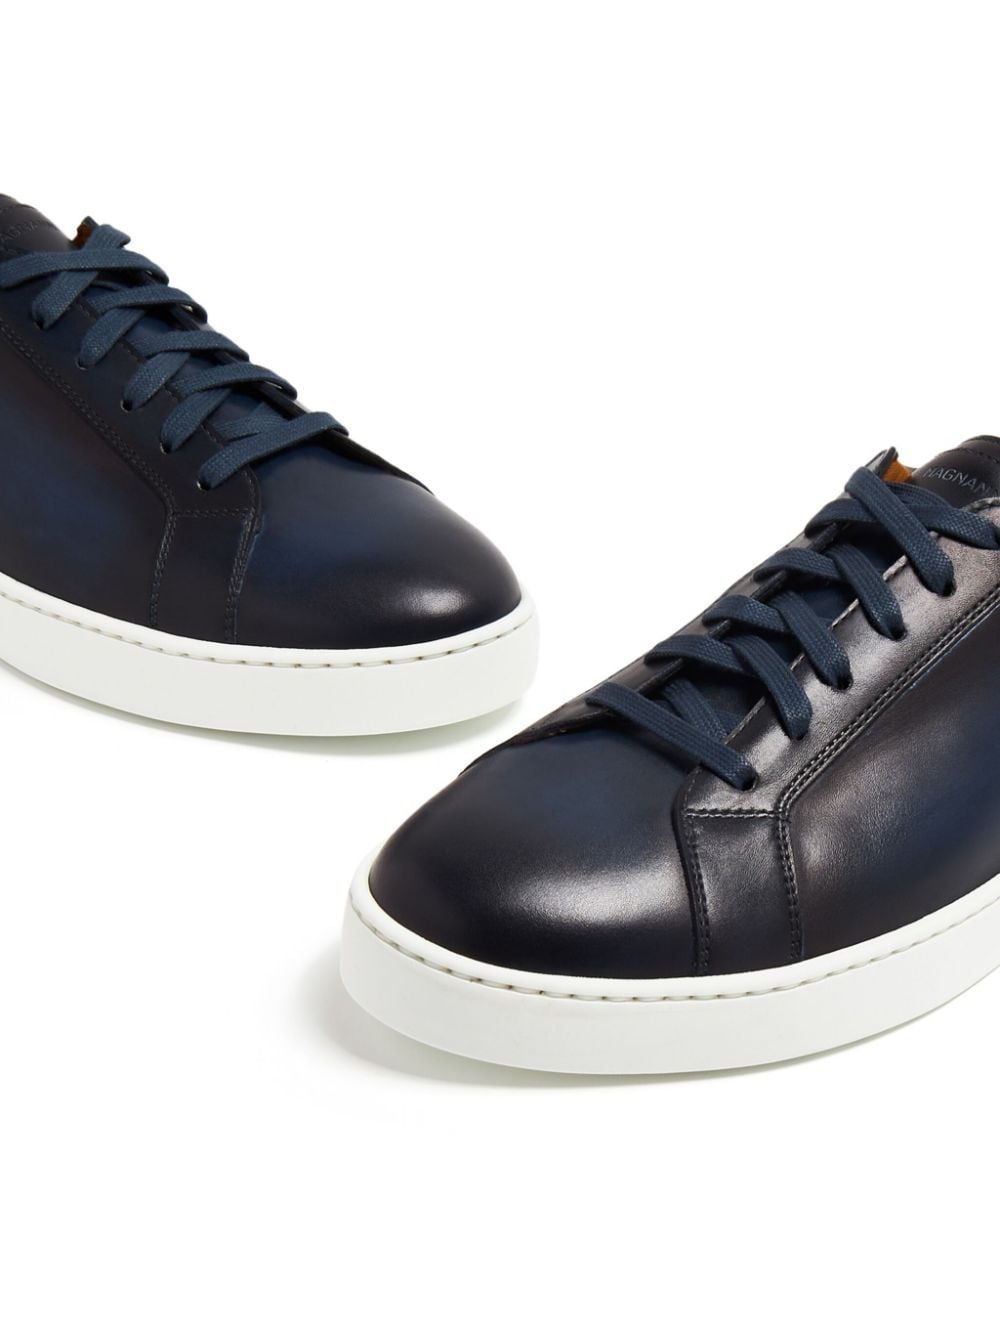 Magnanni Costa Lo ombré-effect Leather Sneakers - Farfetch